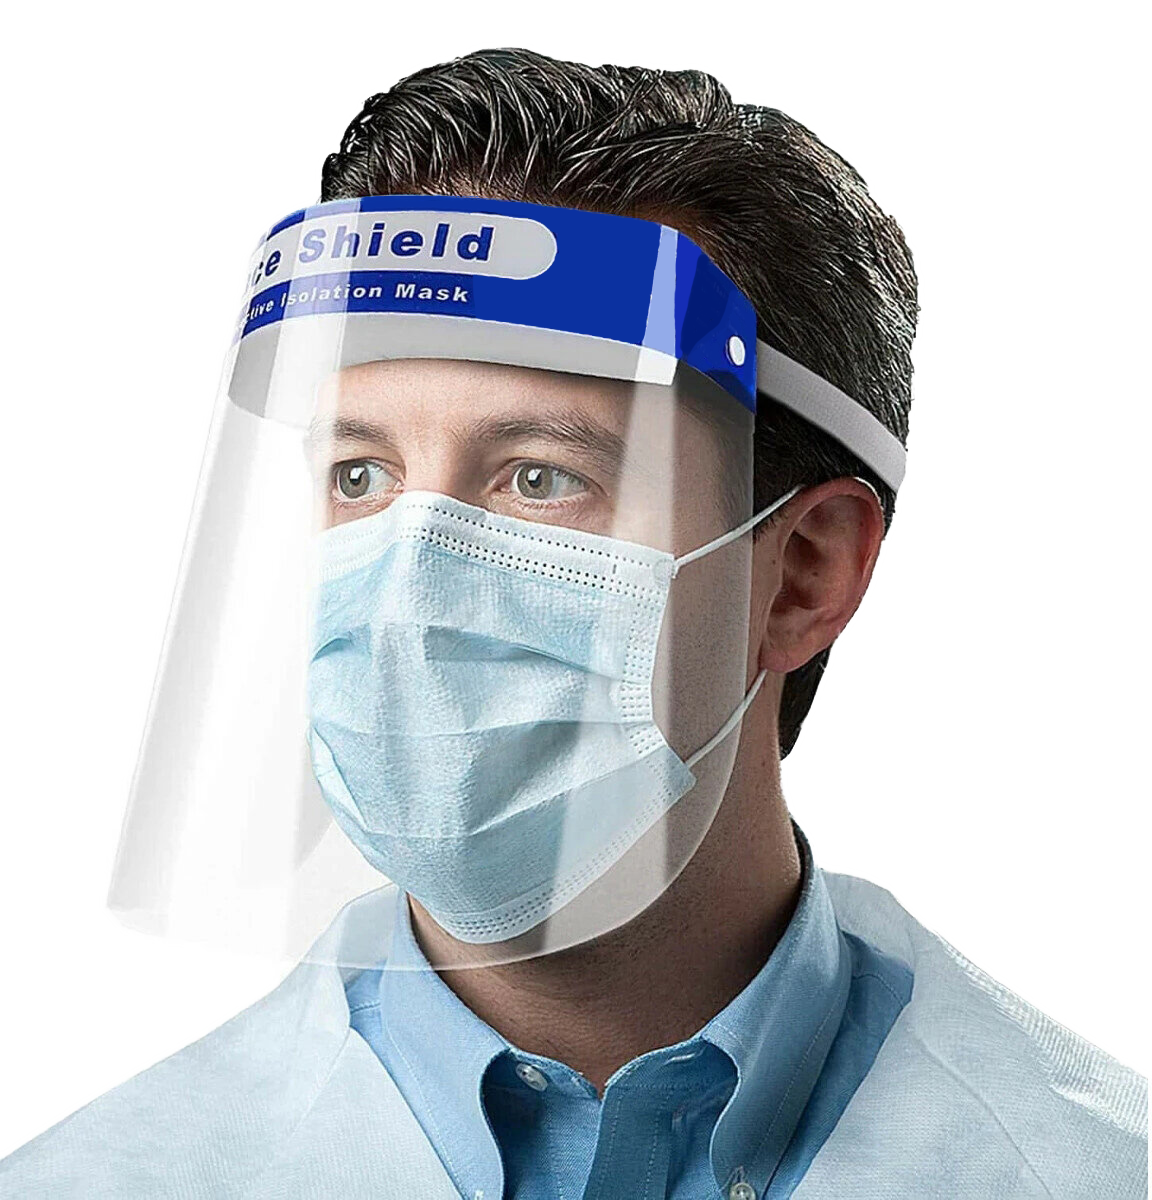 Best Face Shields for Coronavirus and Where to Buy